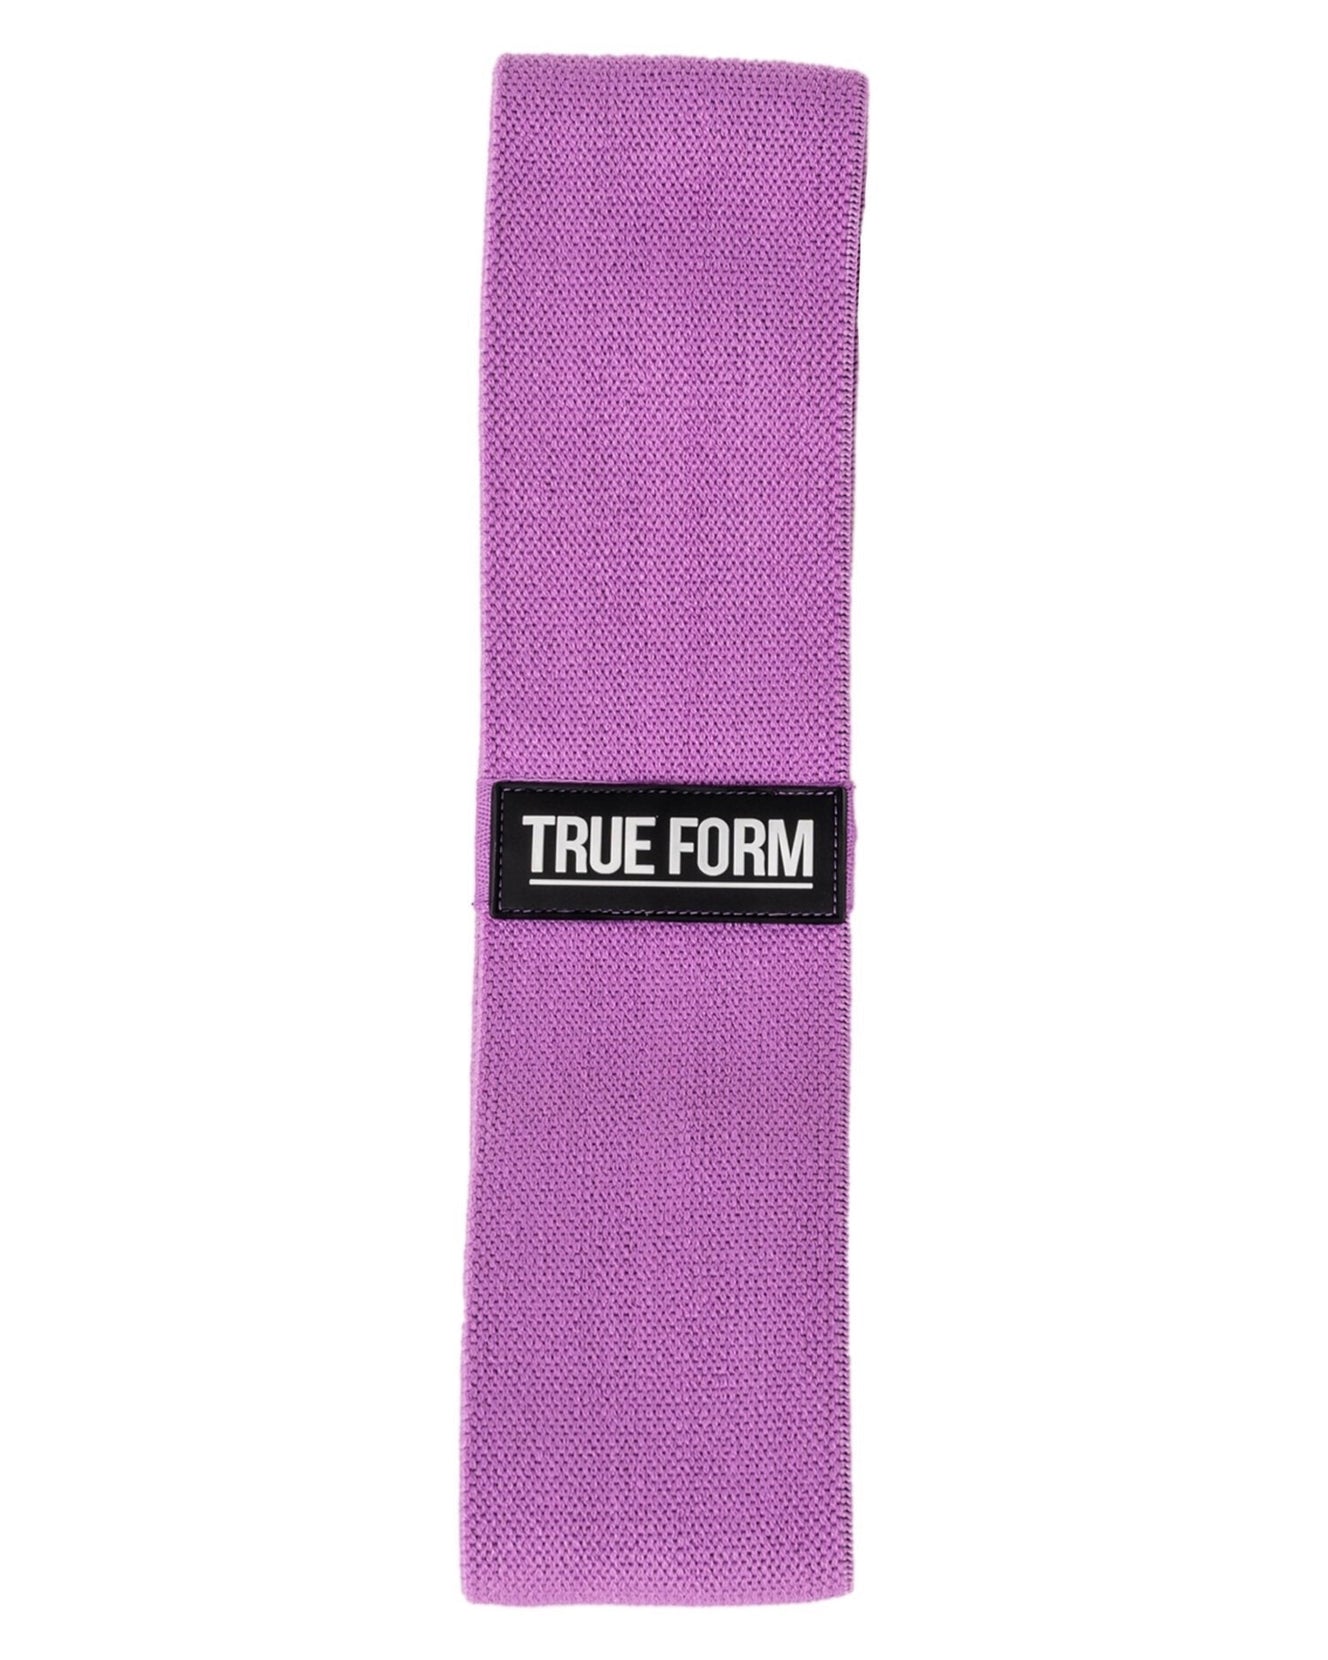 True Form UK heavy gym resistance bands for stretching exercise